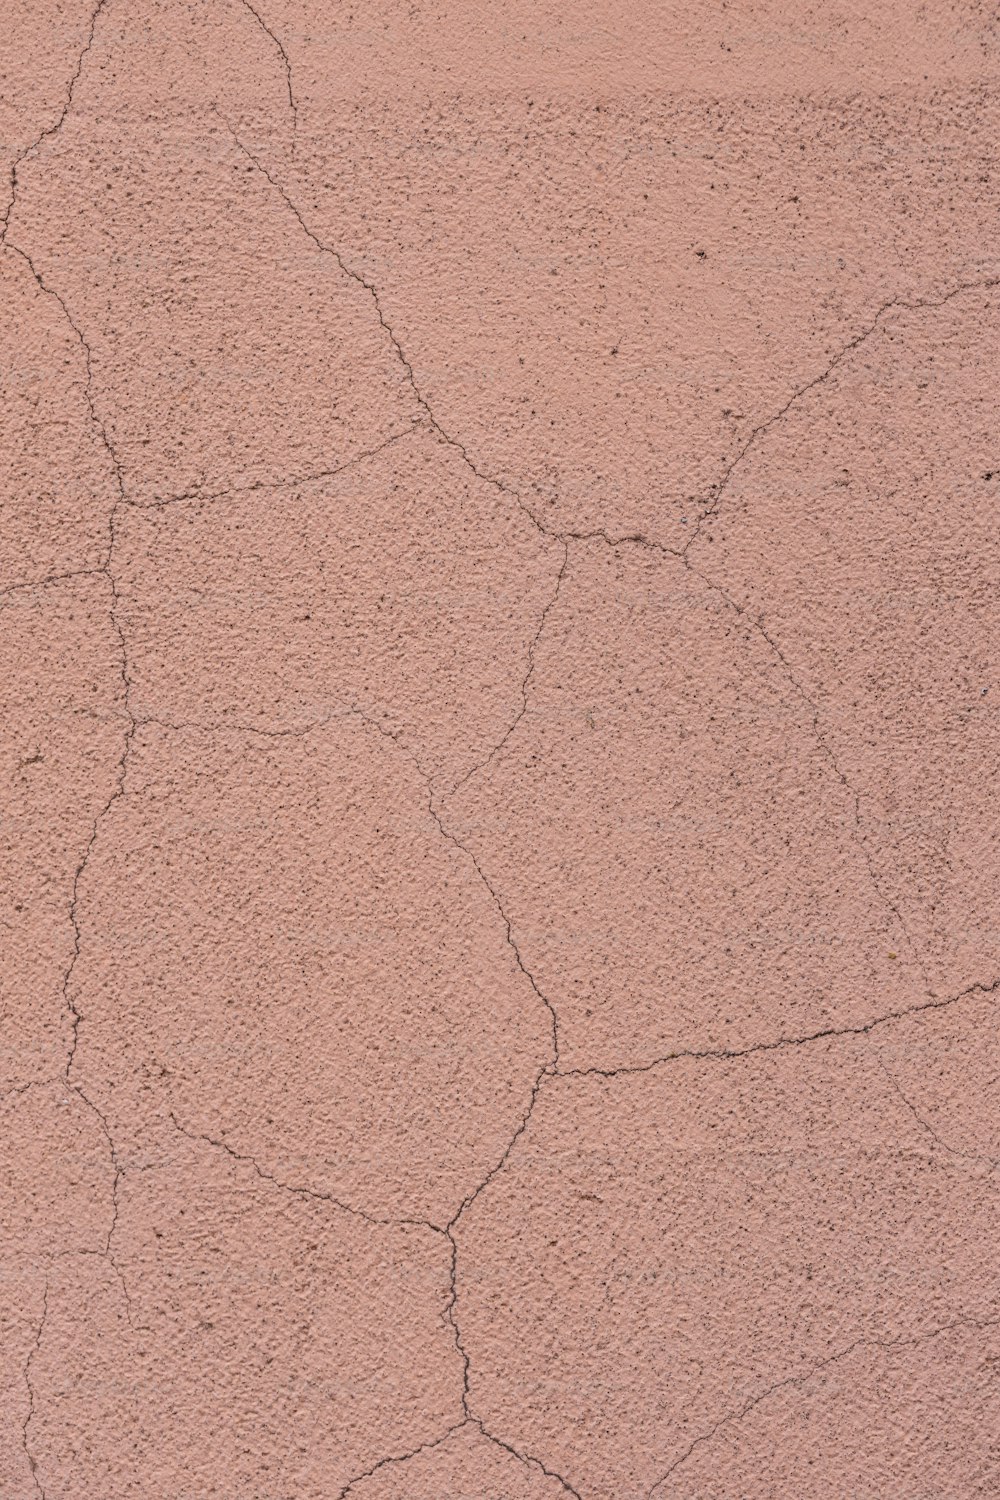 red clay texture